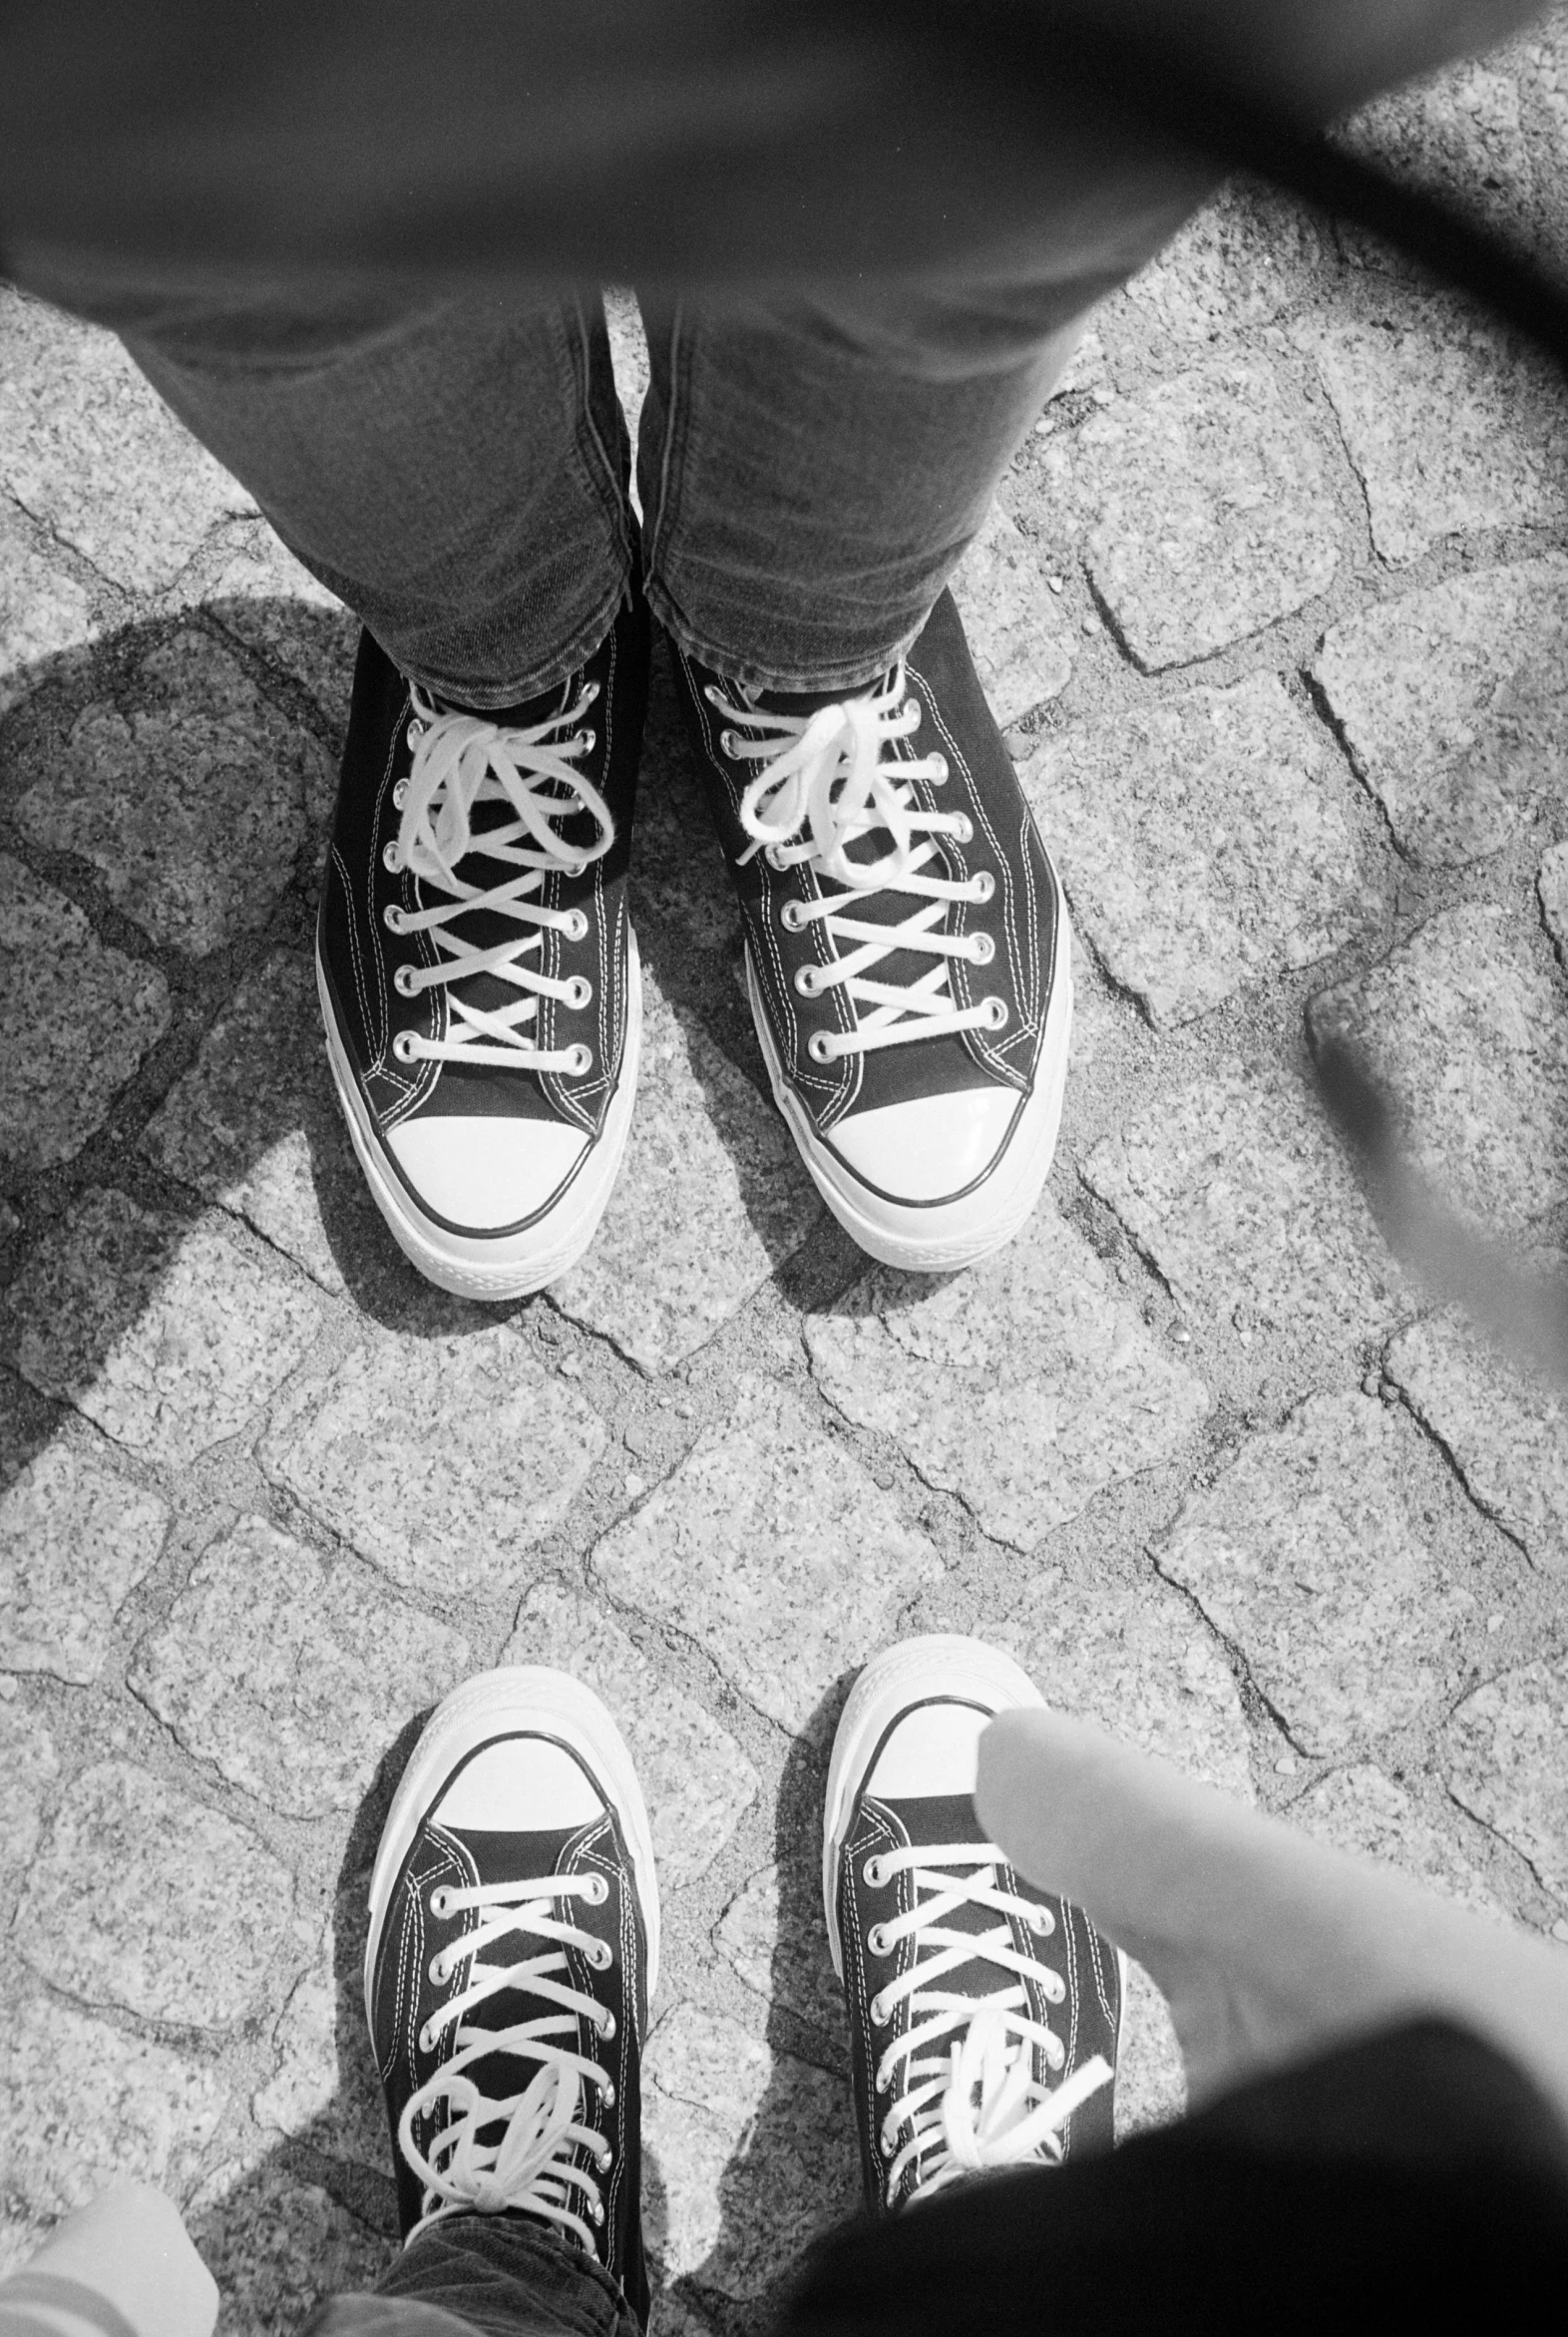 two feet standing on the cement pavement with white converse sneakers